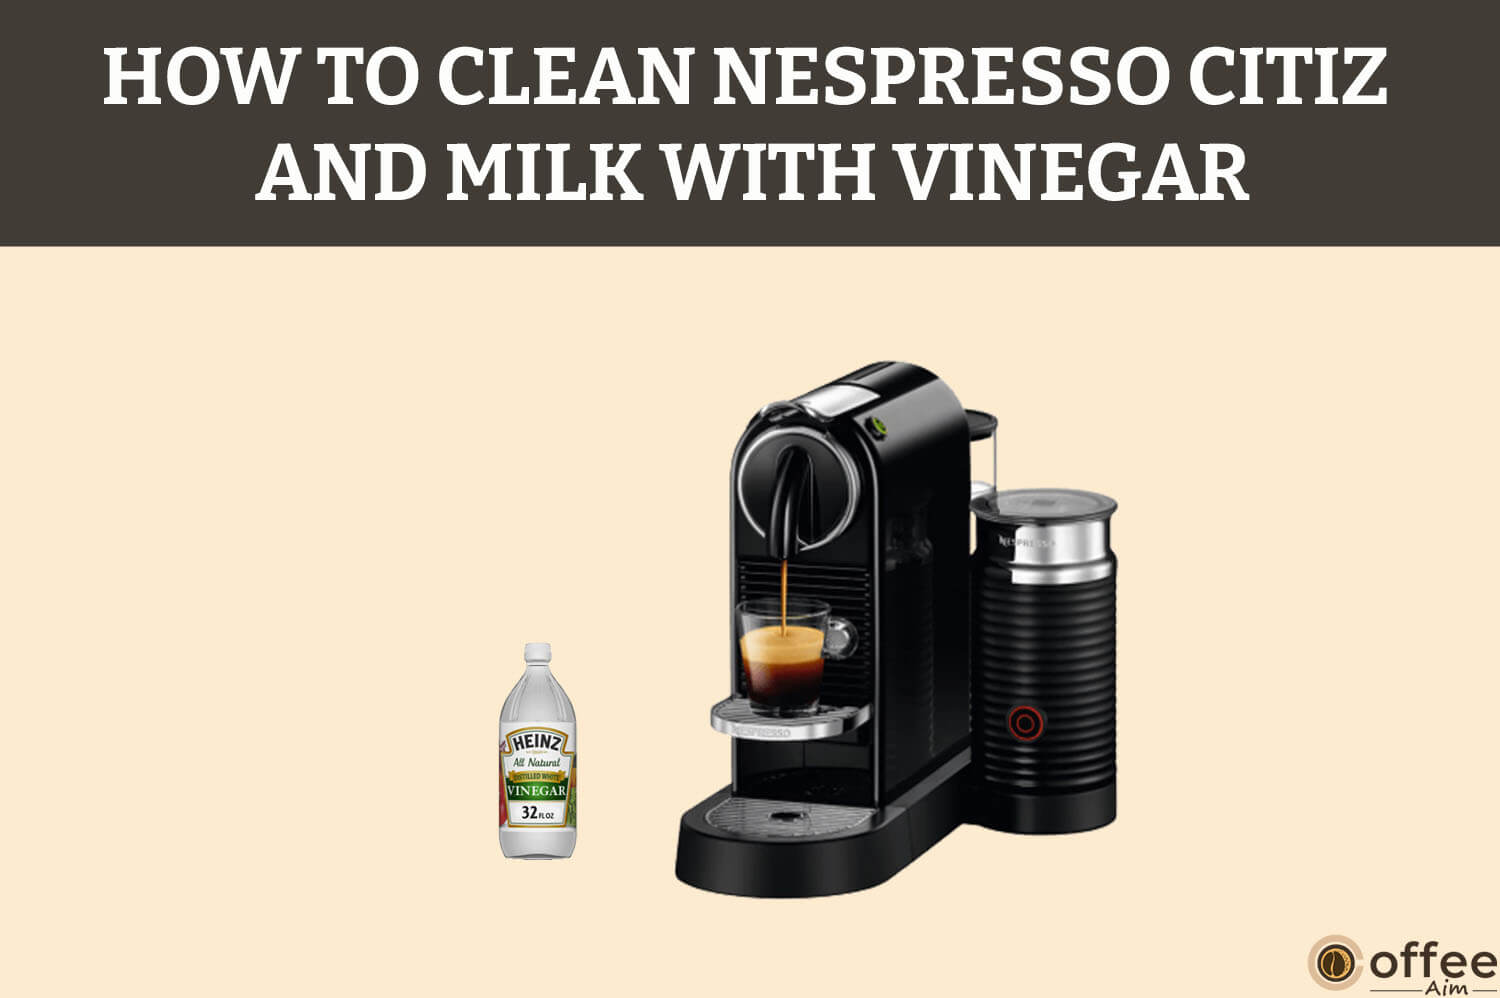 Featured image for the article "How To Clean Nespresso Citiz And Milk With Vinegar"